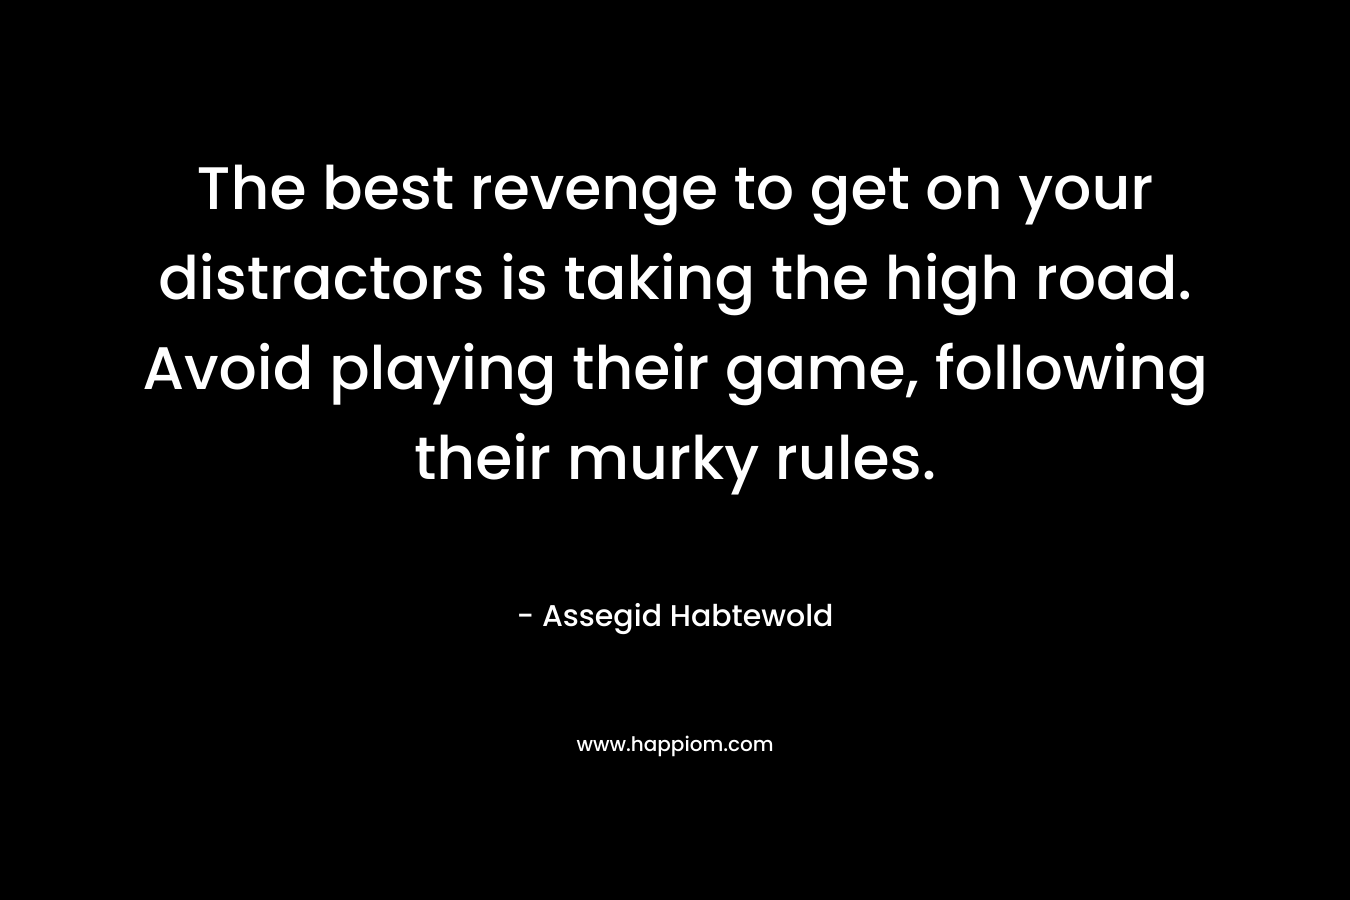 The best revenge to get on your distractors is taking the high road. Avoid playing their game, following their murky rules. – Assegid Habtewold